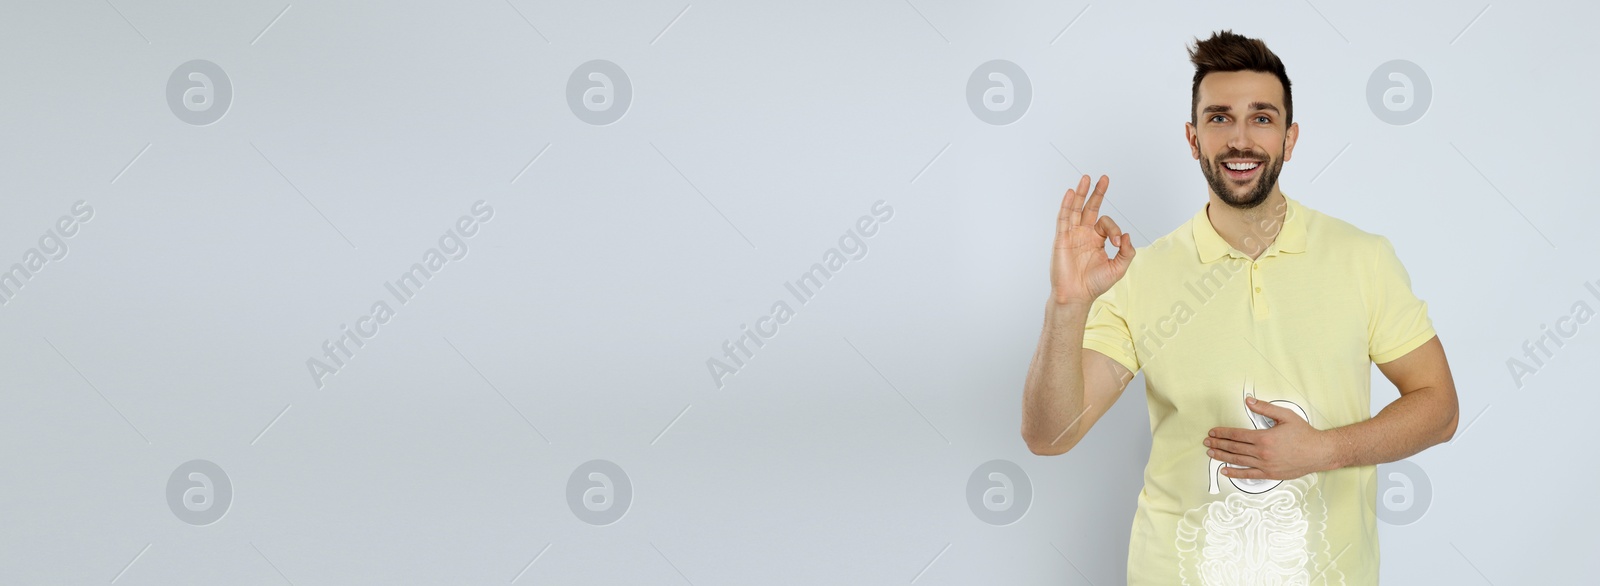 Image of Happy man with healthy digestive system on light grey background, banner design with space for text. Illustration of gastrointestinal tract